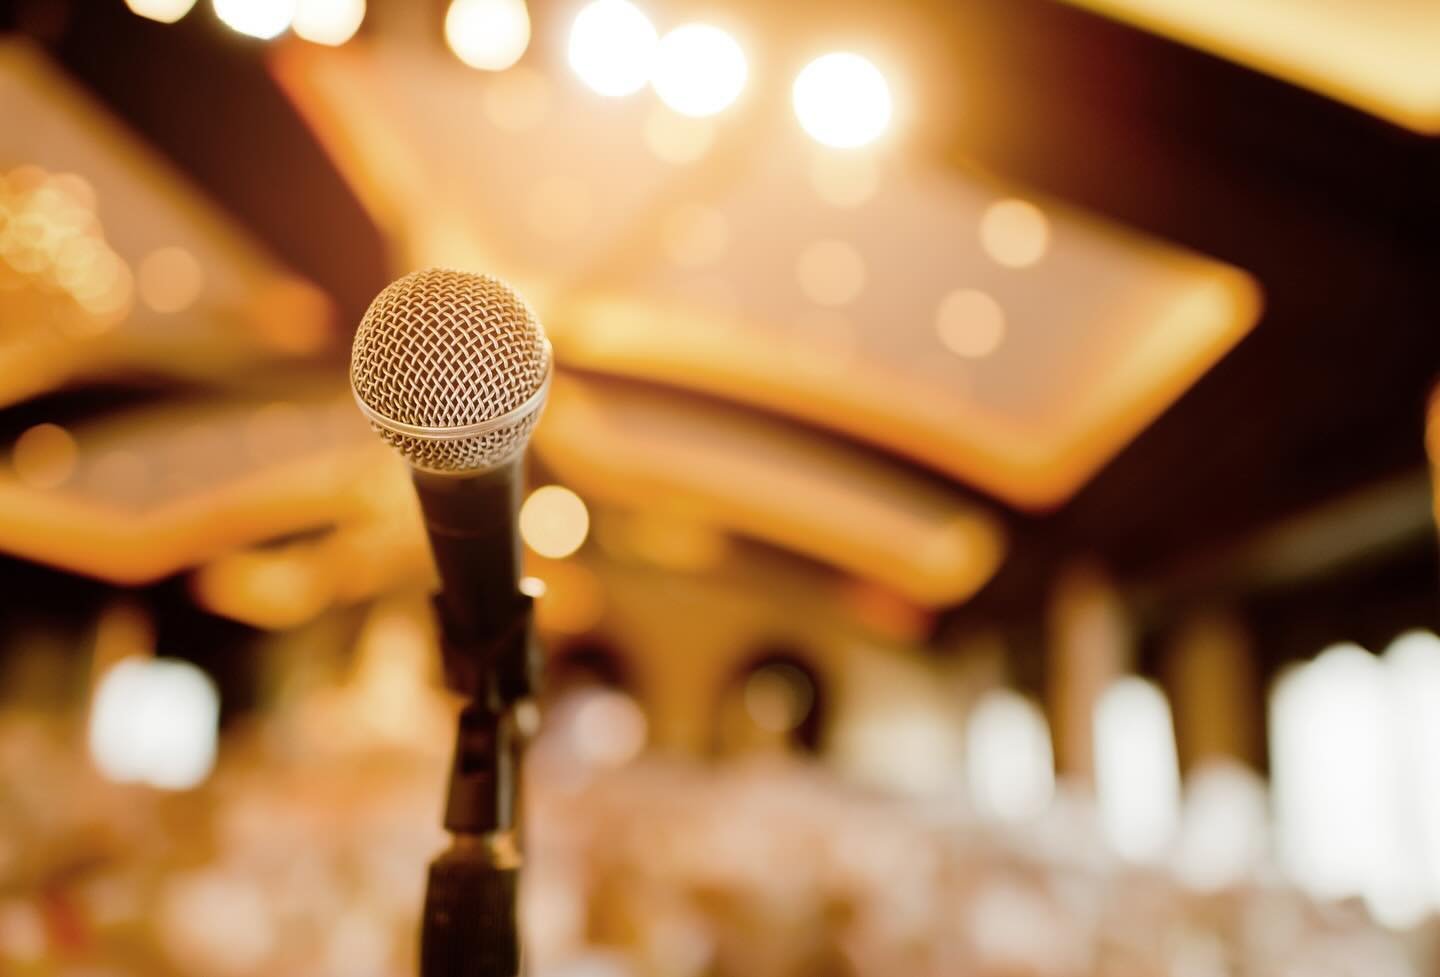 Event planning can be overwhelming but we are here to make your choices about live music simple! 🎶

Contact us to see how we can compliment your reception, gala, anniversary or other celebration. 

[contact link in bio]